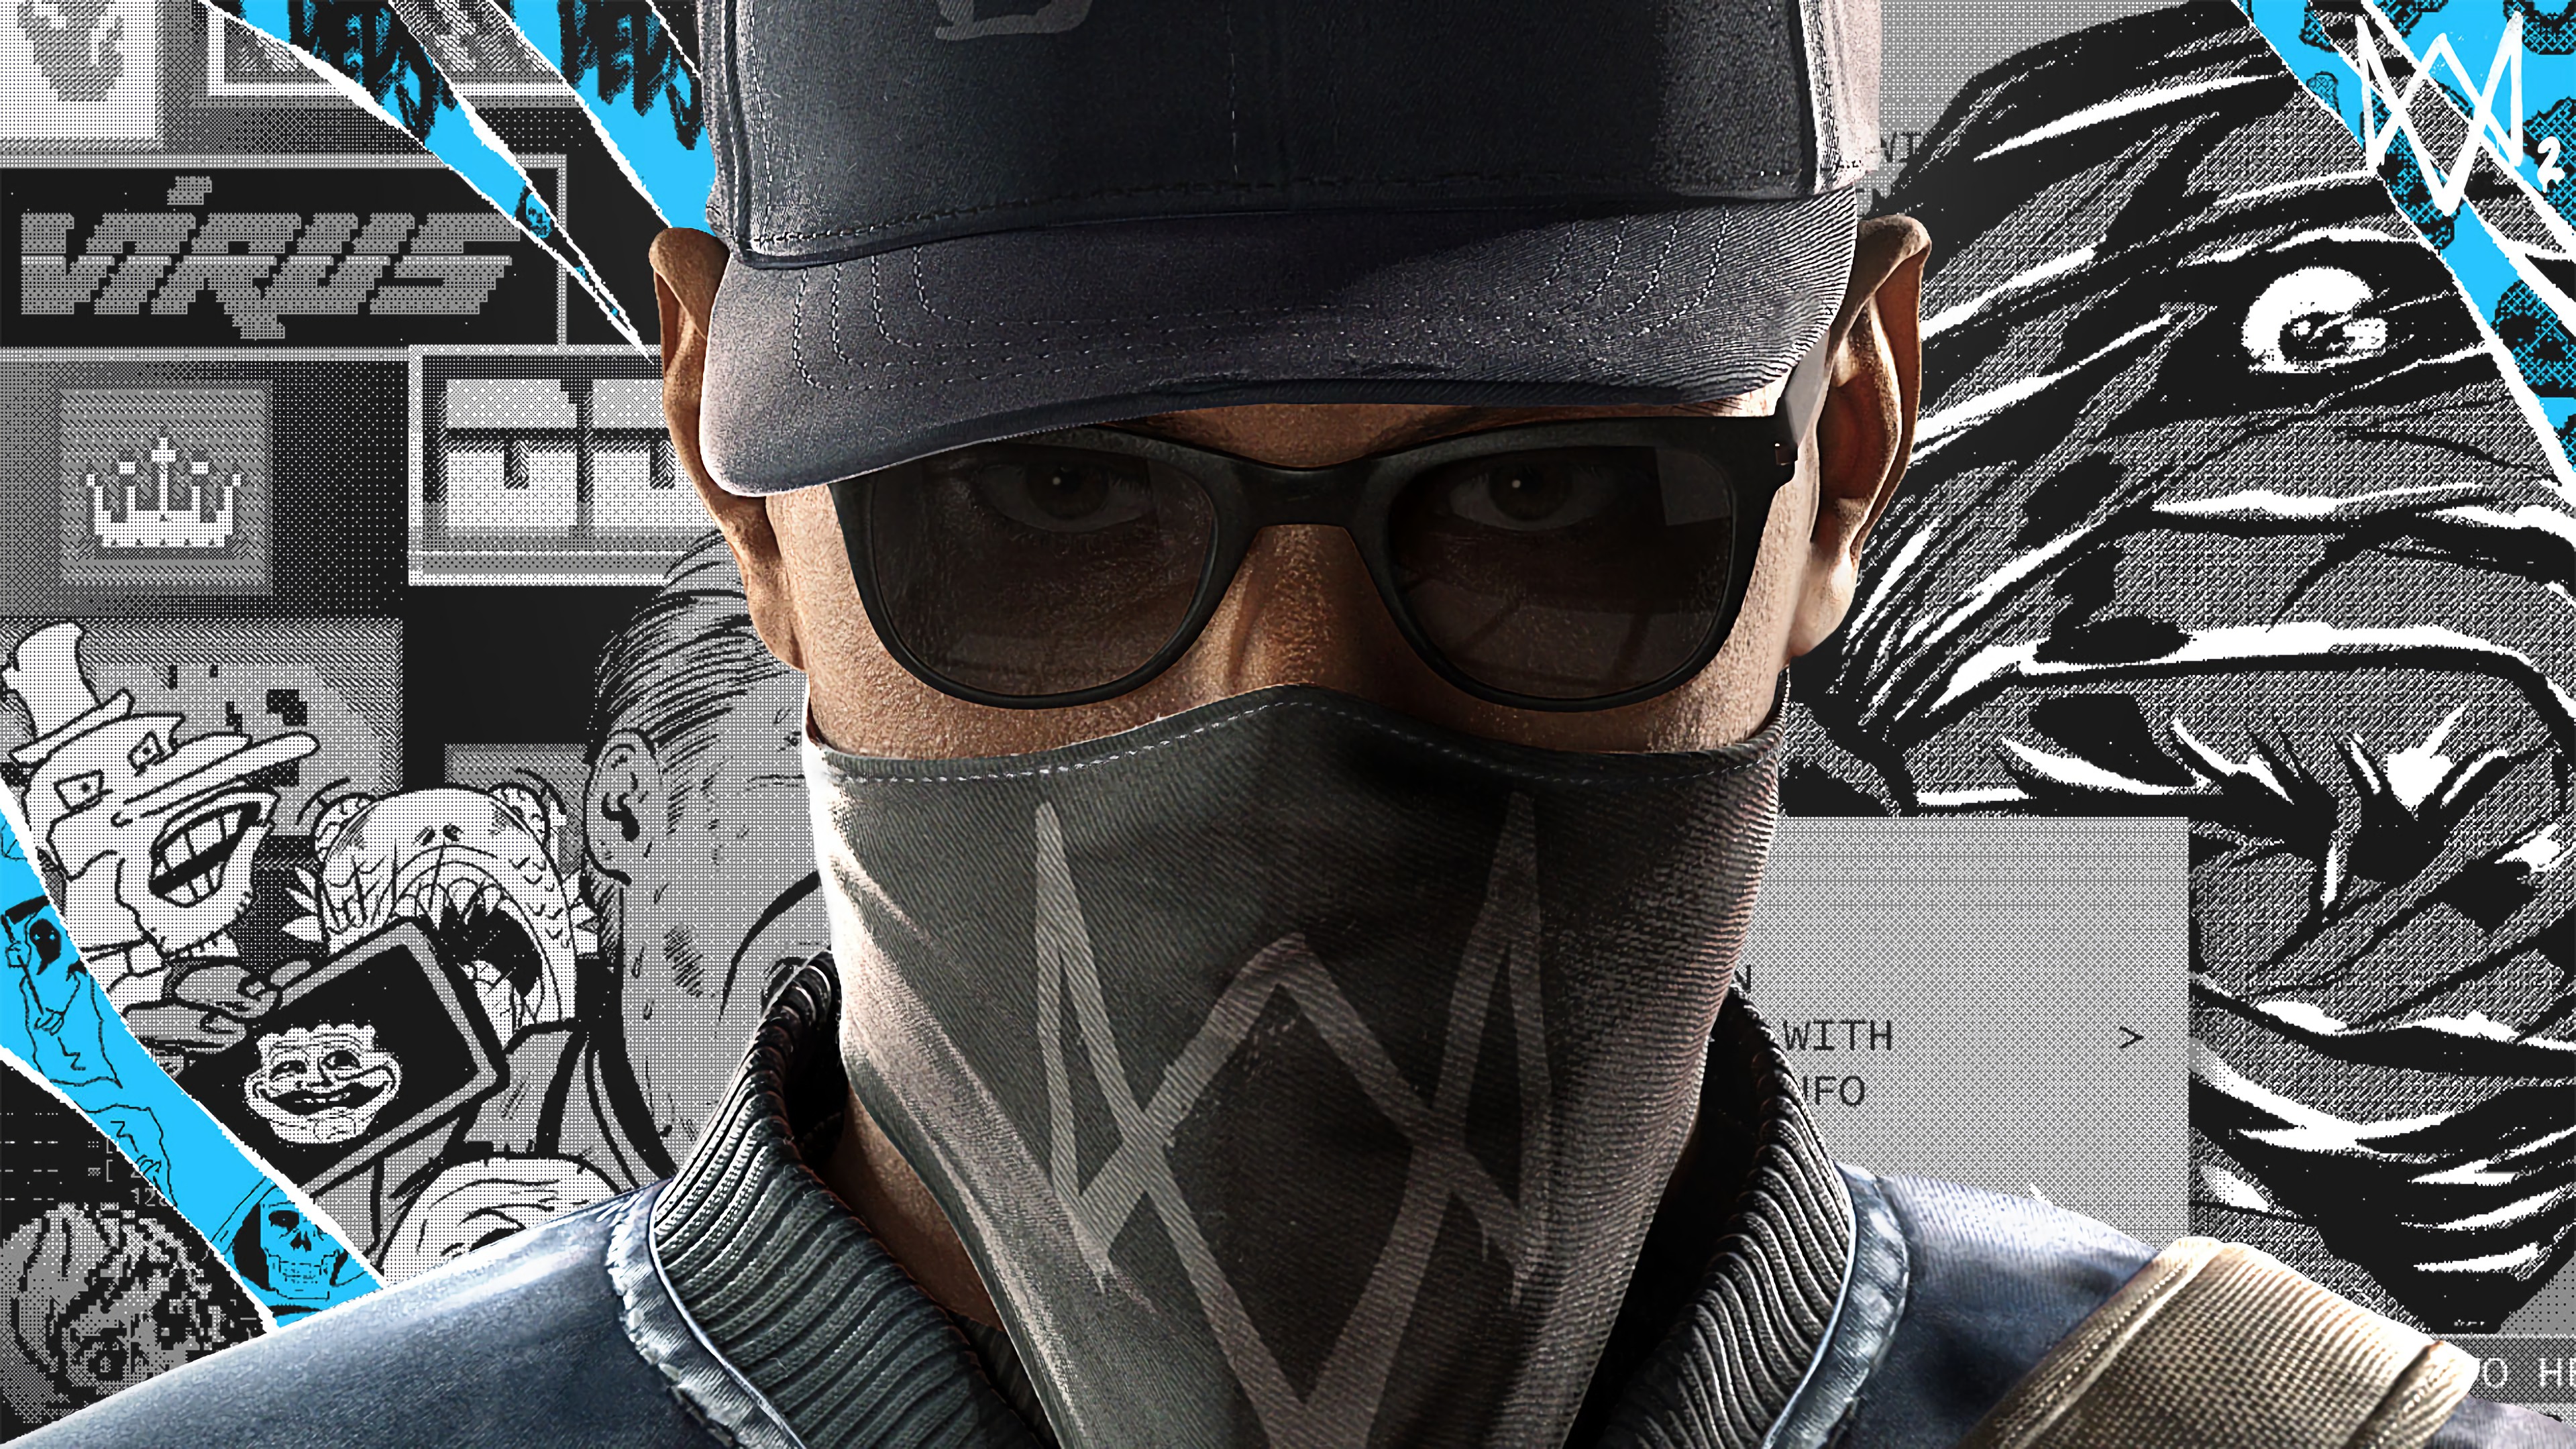 3840x Watch Dogs 2 Marcus Holloway Face 3840x Resolution Wallpaper Hd Games 4k Wallpapers Images Photos And Background Wallpapers Den